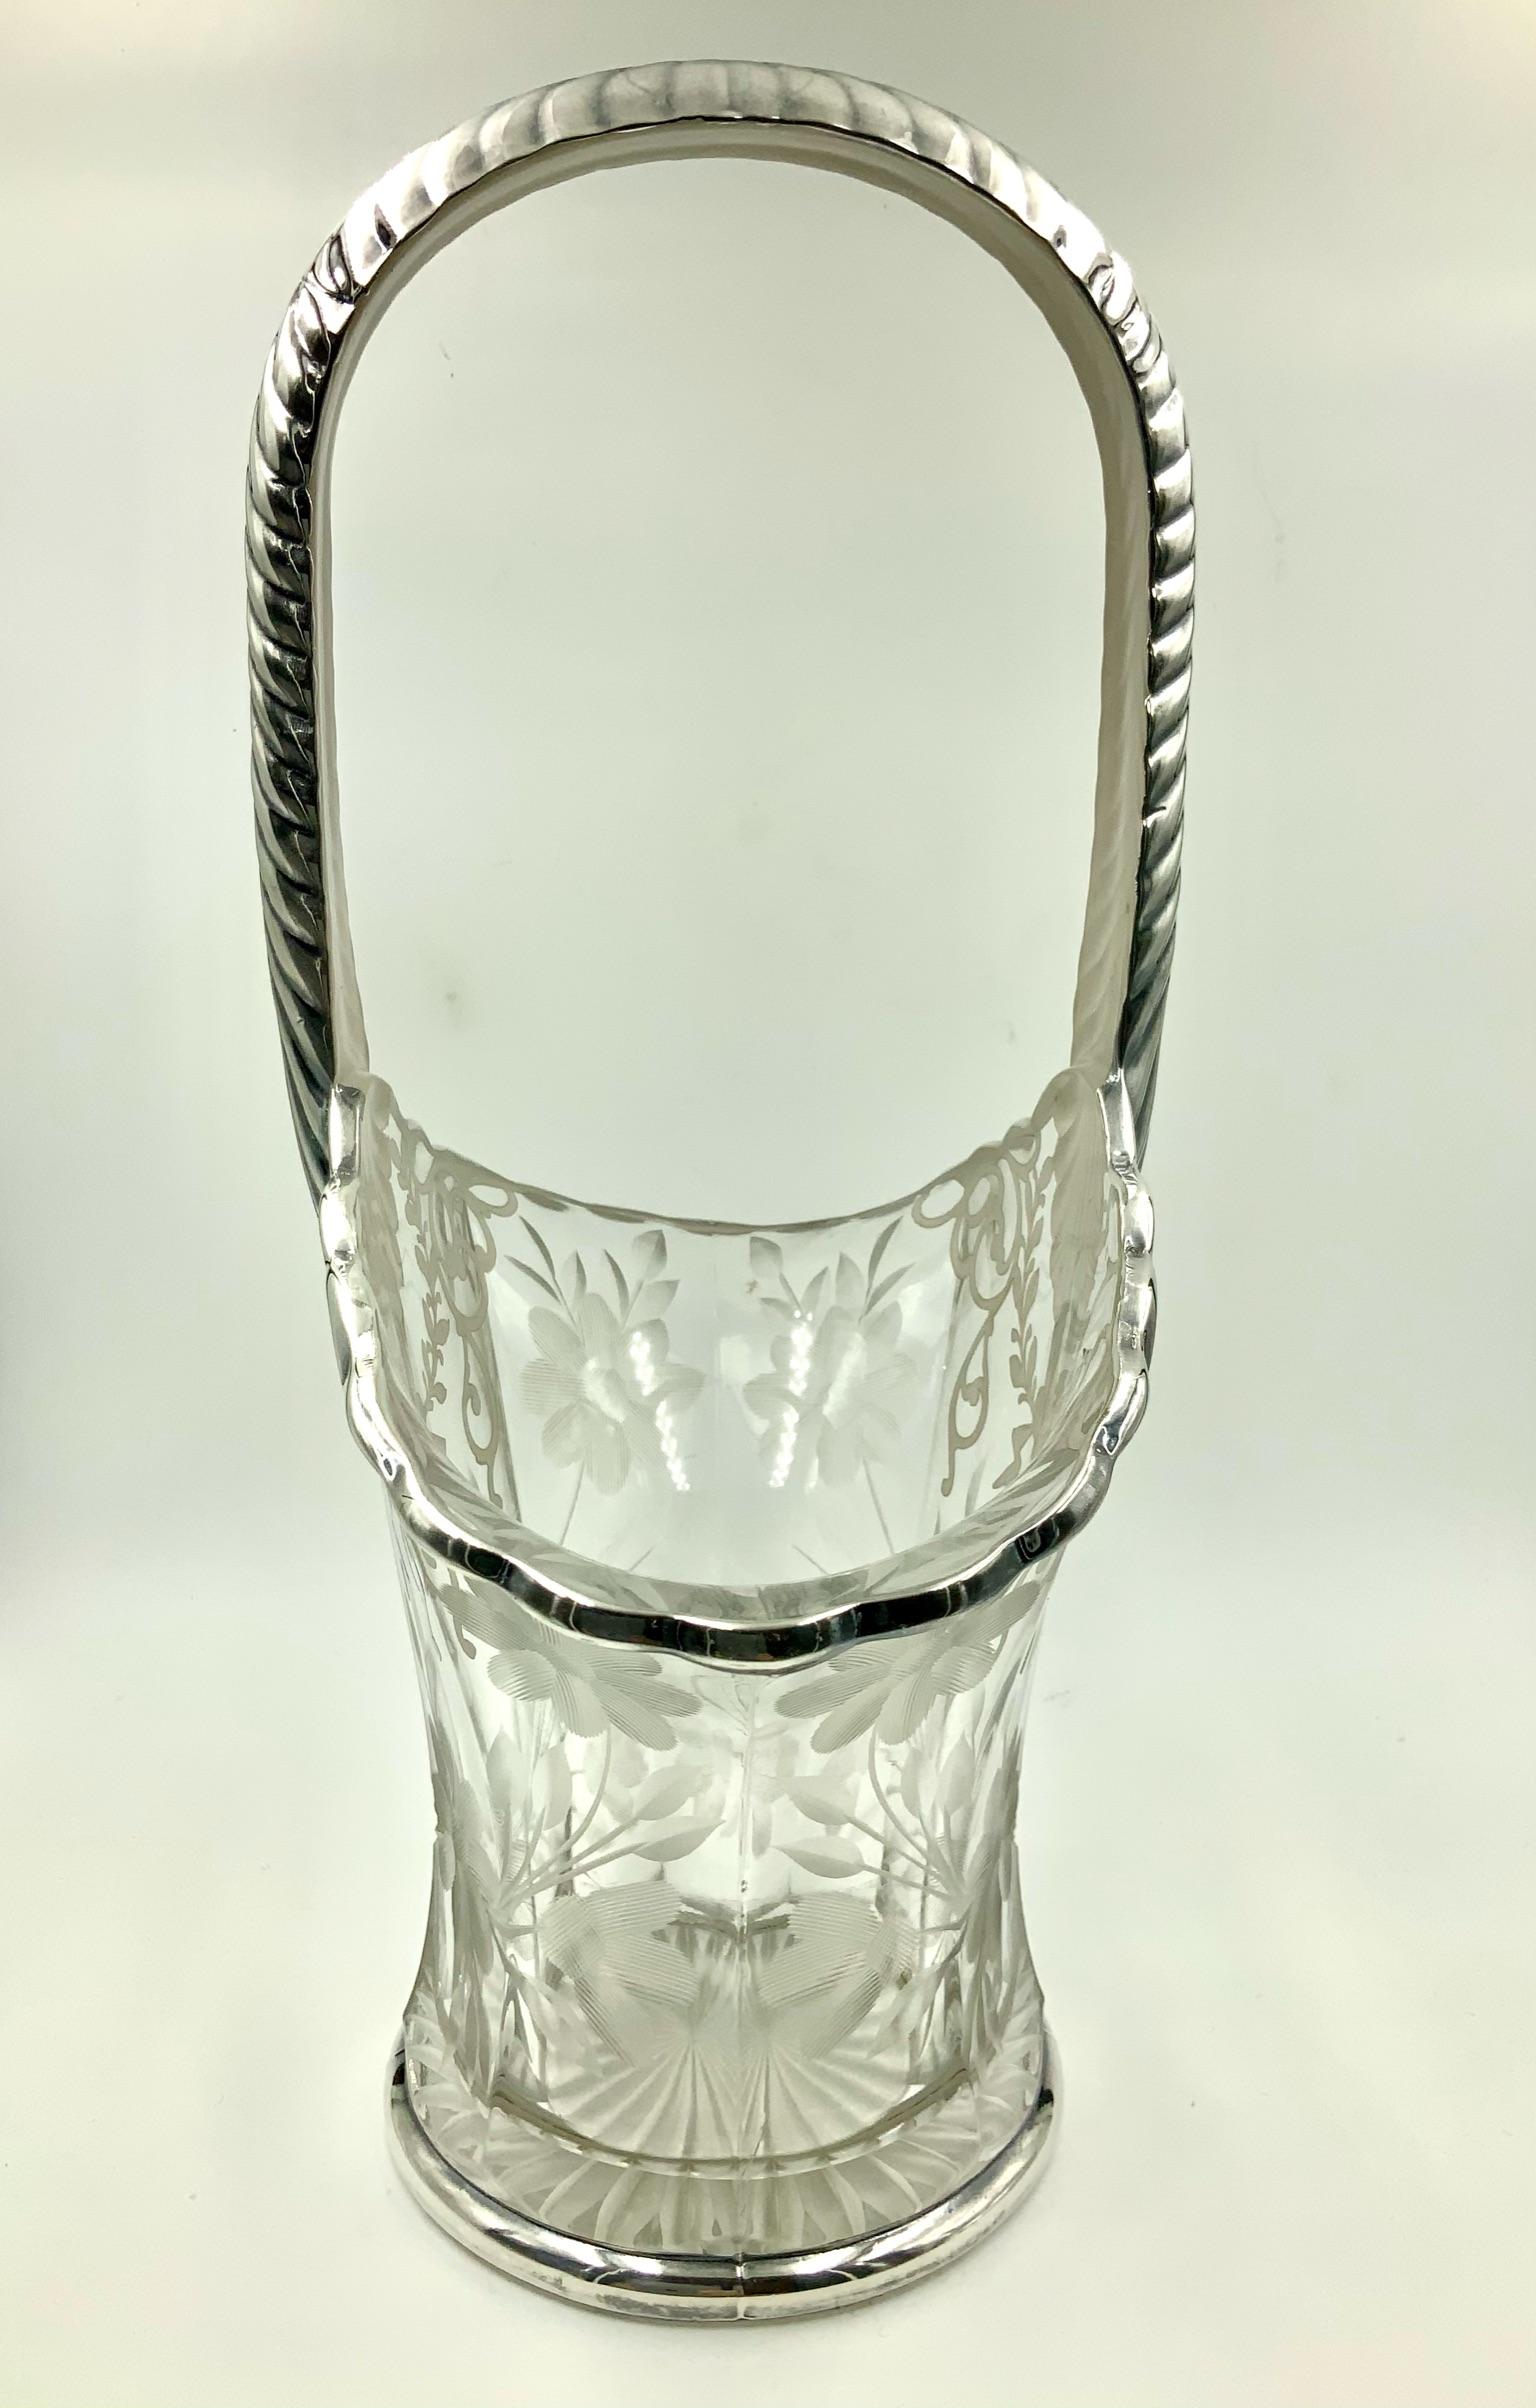 Antique Etched Floral Sterling Silver Overlay Wedding Bride's Basket Vase In Good Condition For Sale In Miami Beach, FL